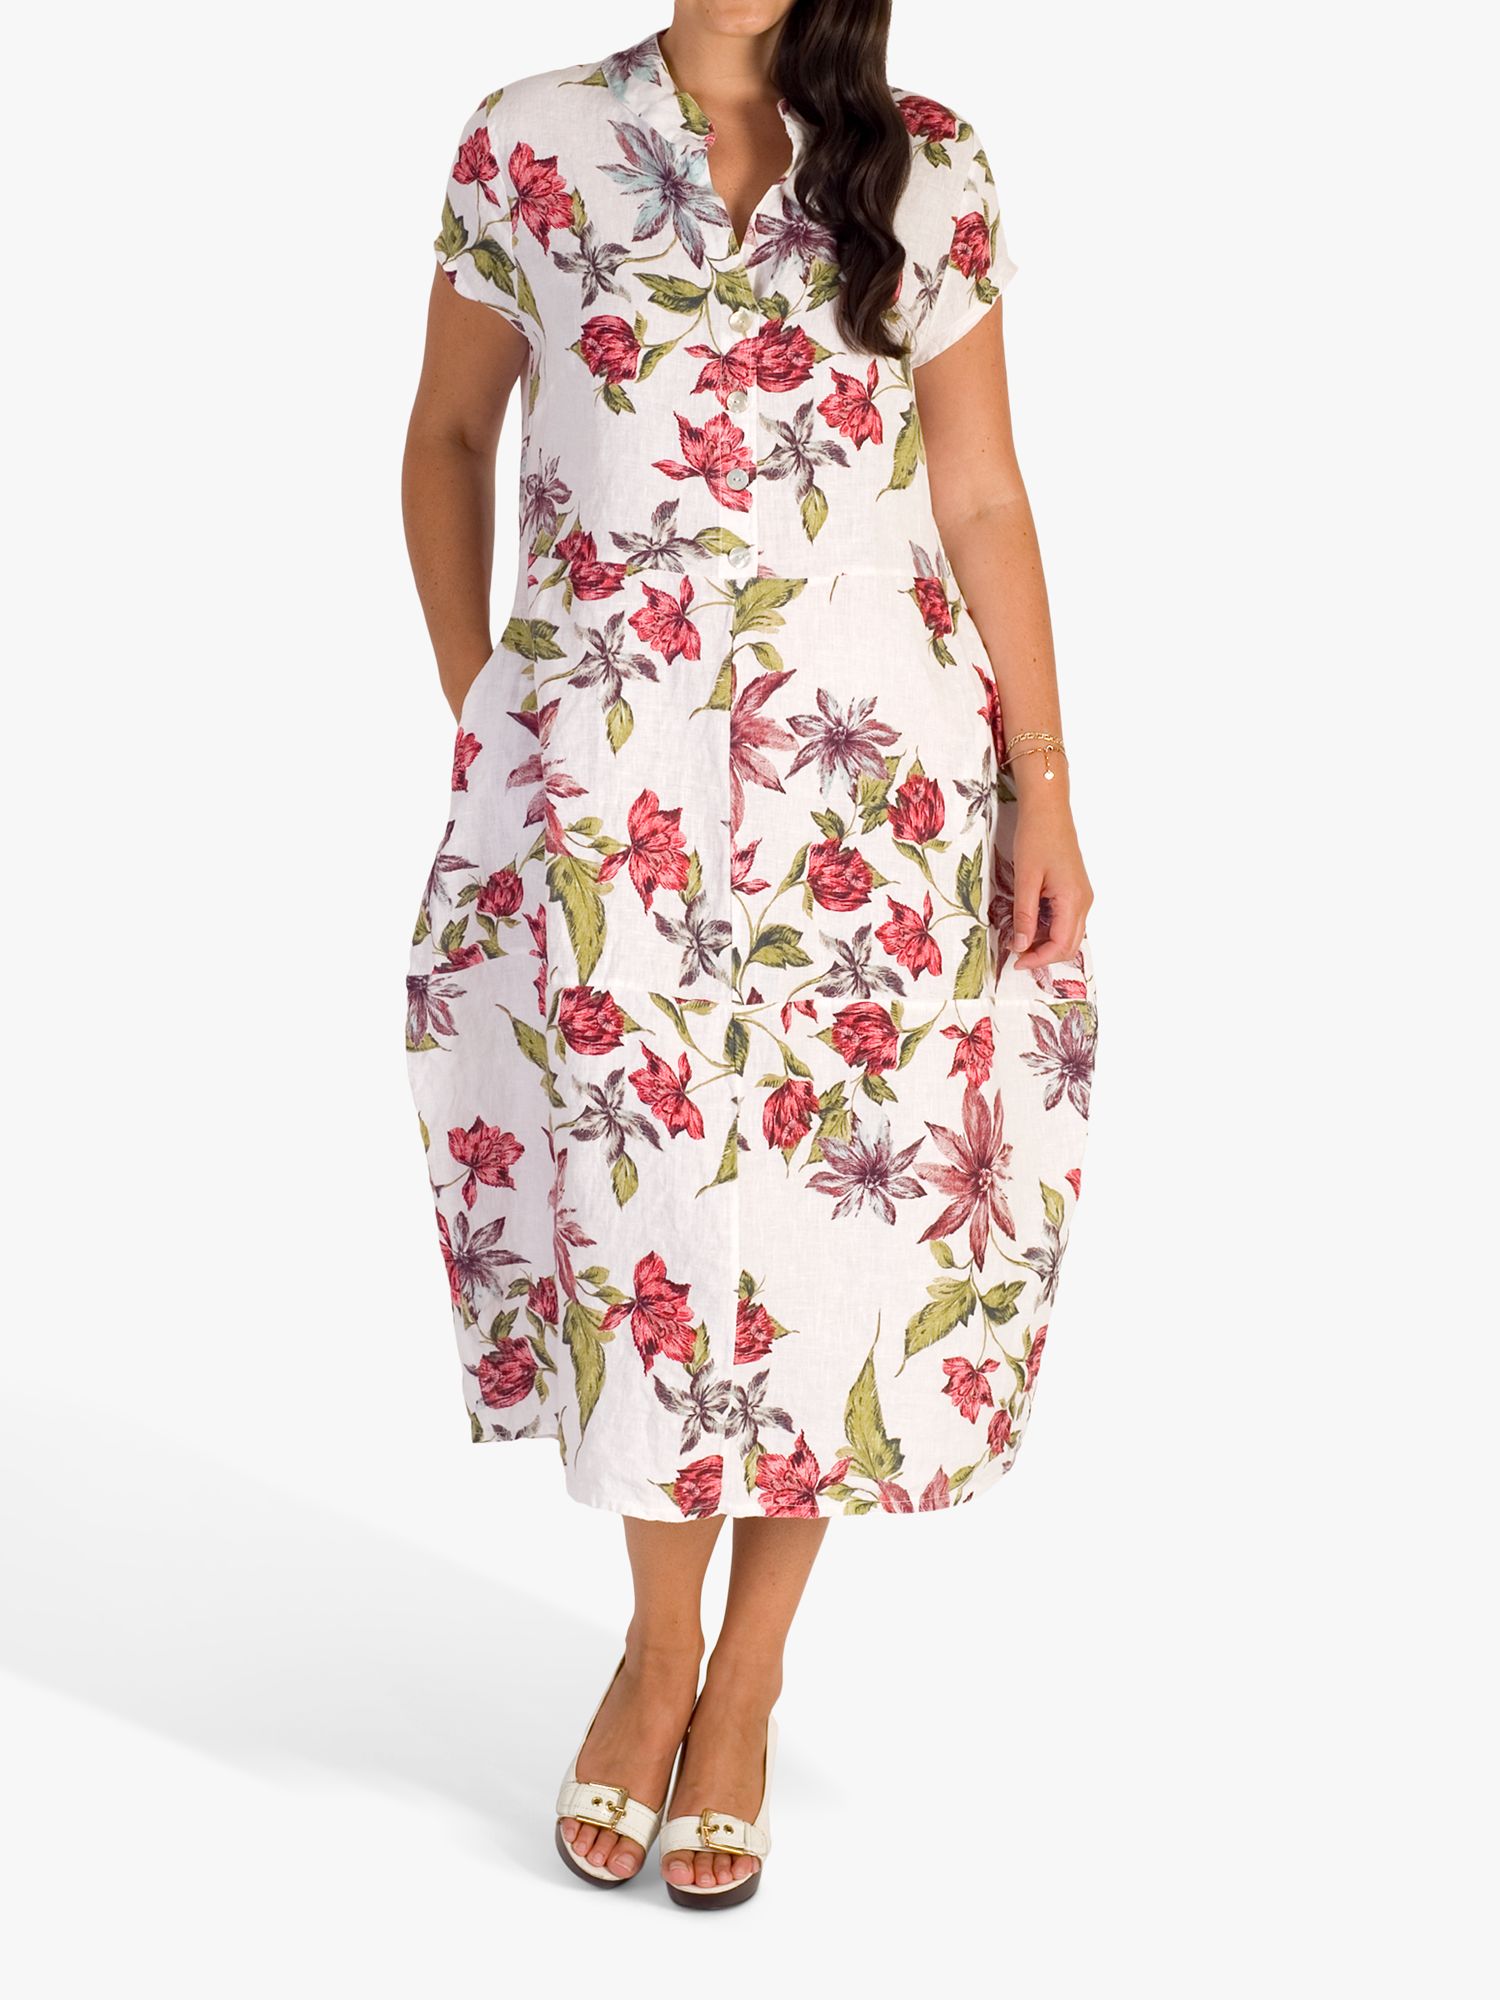 chesca Floral Print Cocoon Linen Dress, White/Red at John Lewis & Partners